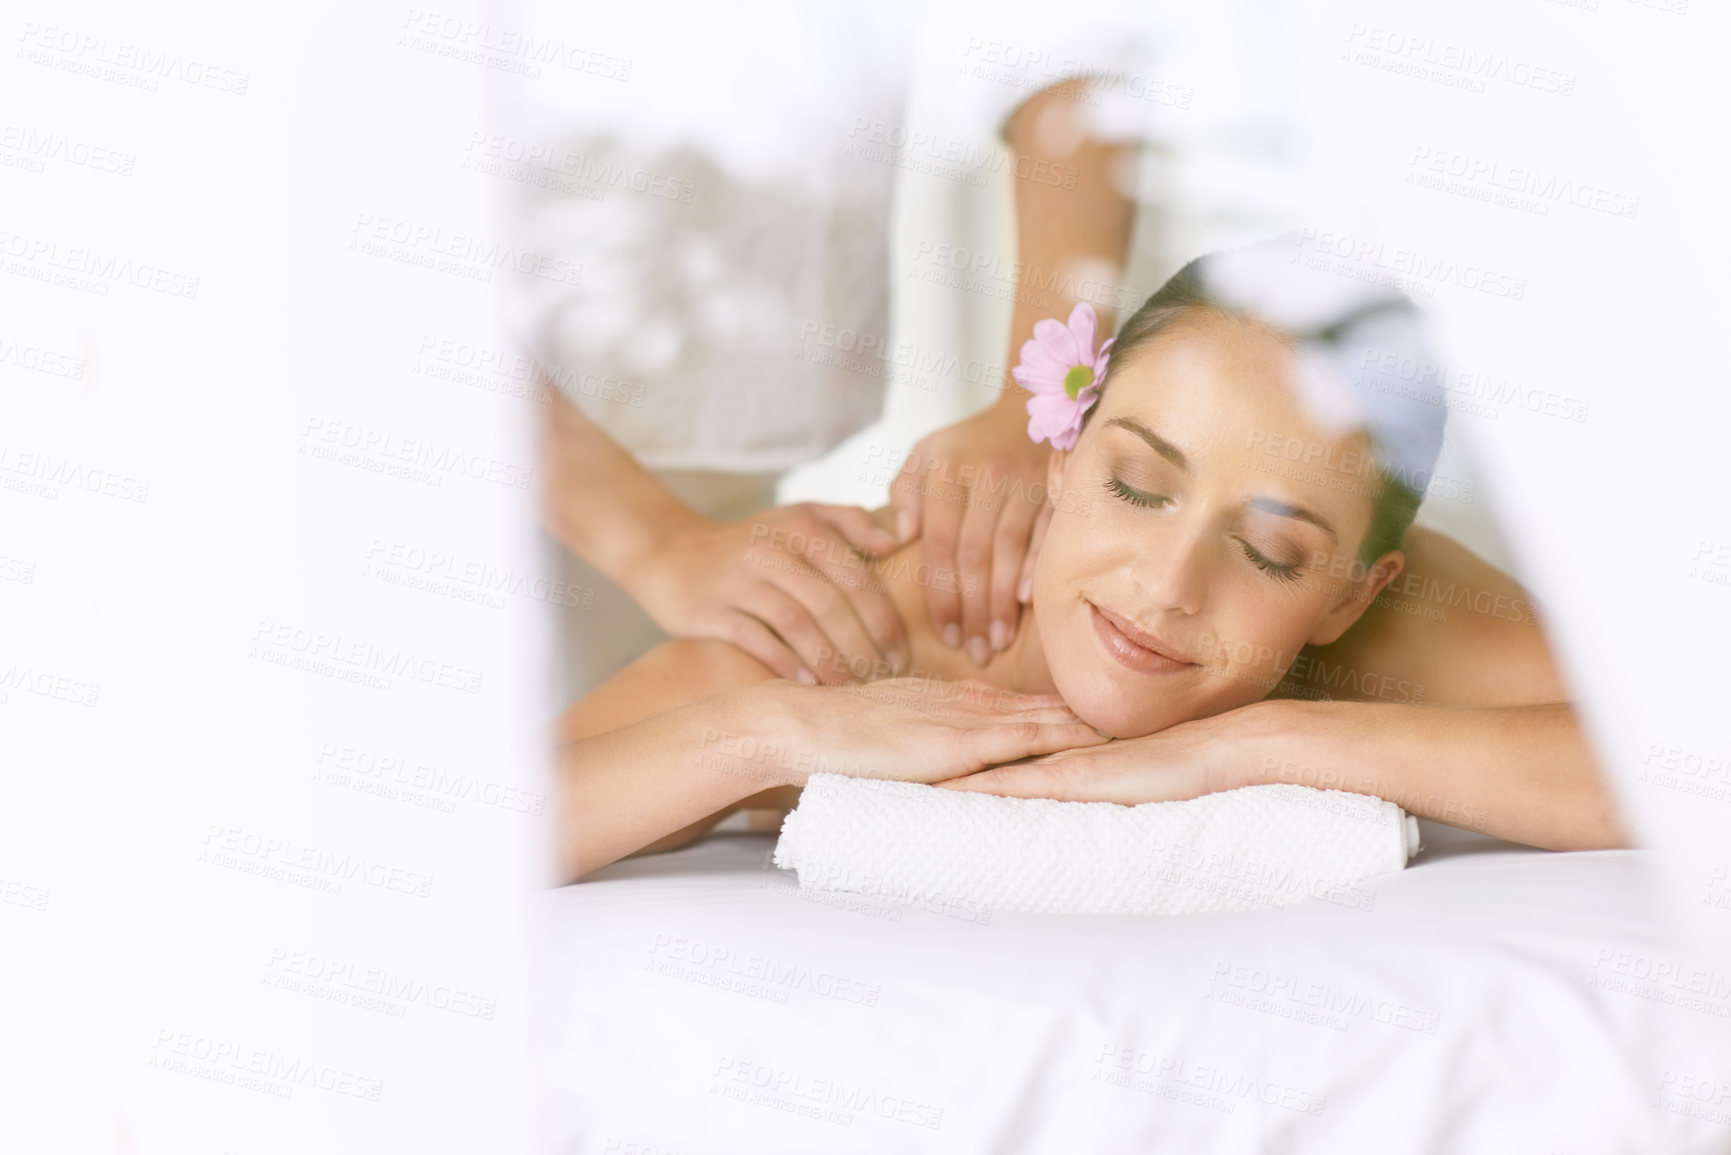 Buy stock photo Relax, massage and woman at spa mockup for health, wellness and balance with luxury holistic treatment. Self care, peace and calm girl on table for muscle therapy, comfort and zen body pamper service